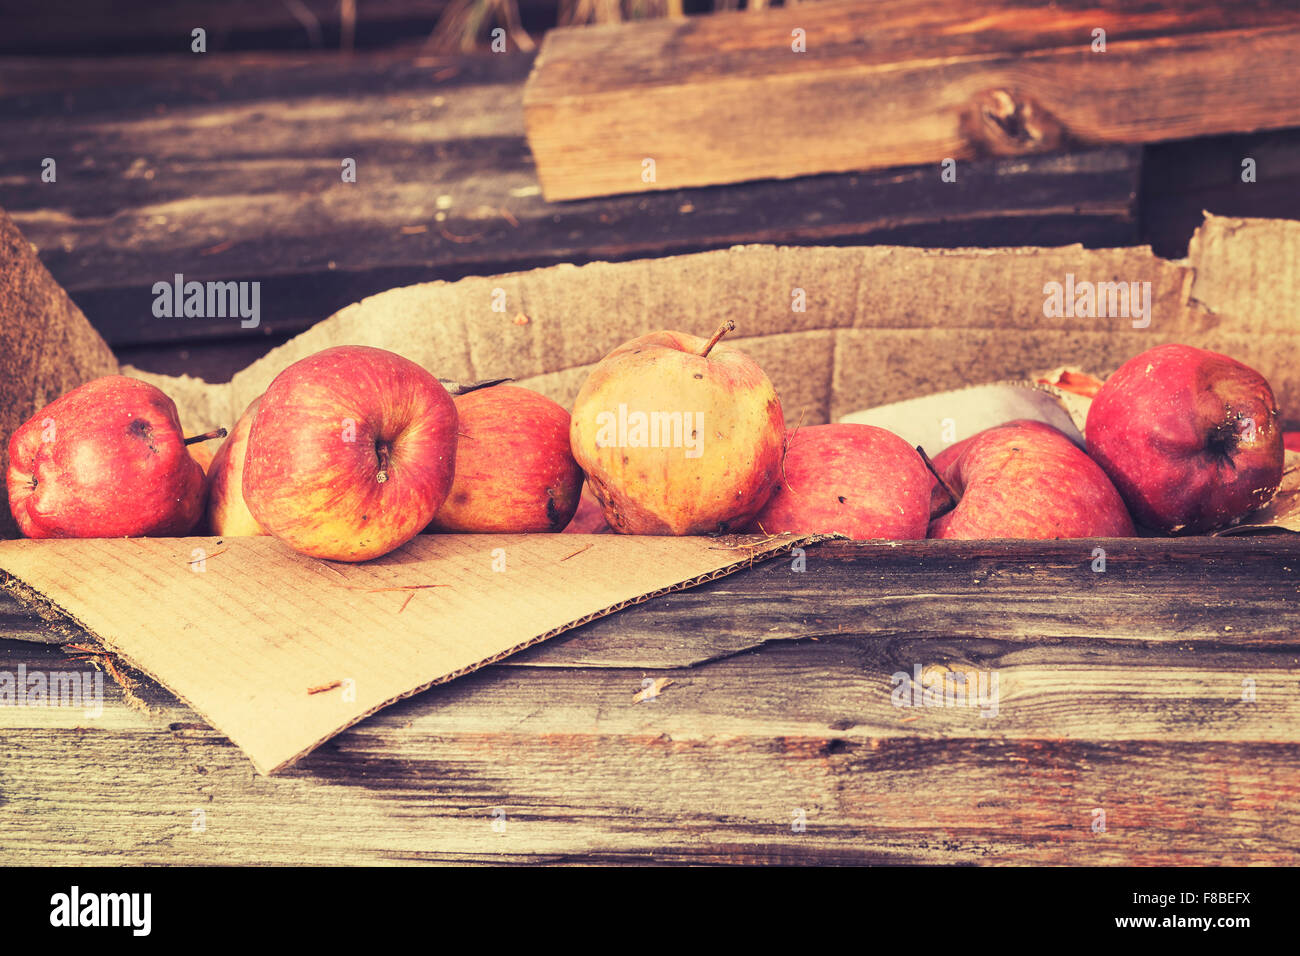 Vintage toned rotten apples in carton on wooden boards. Stock Photo